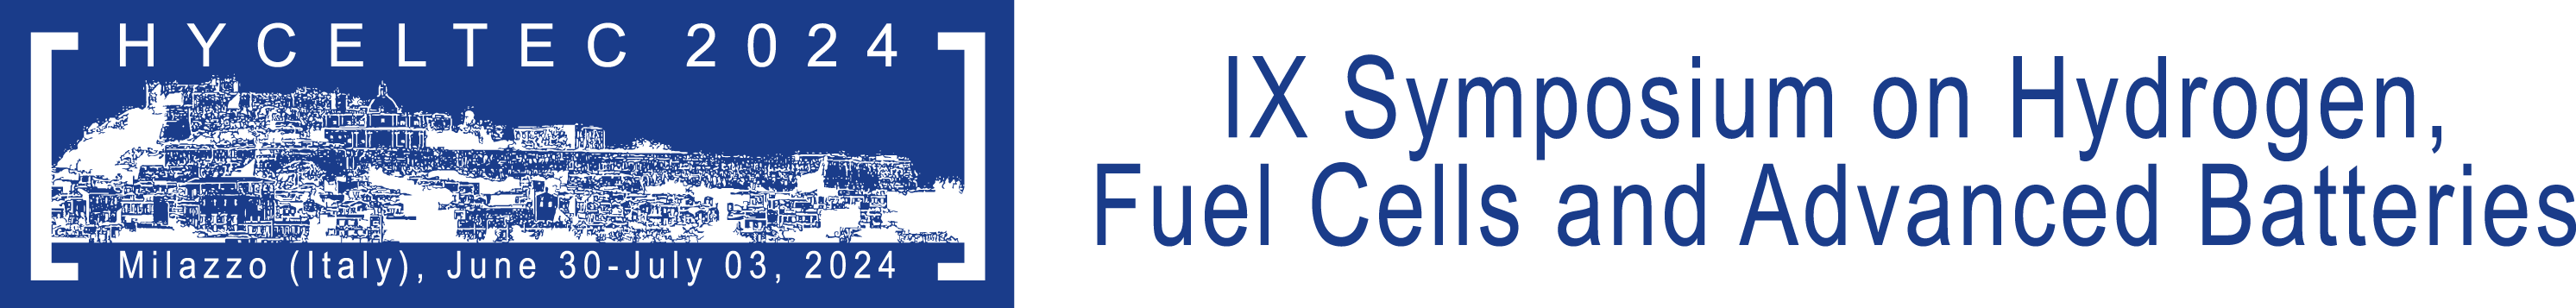 IX Symposium on Hydrogen, Fuel Cells and Advanced Batteries, HYCELTEC 2024